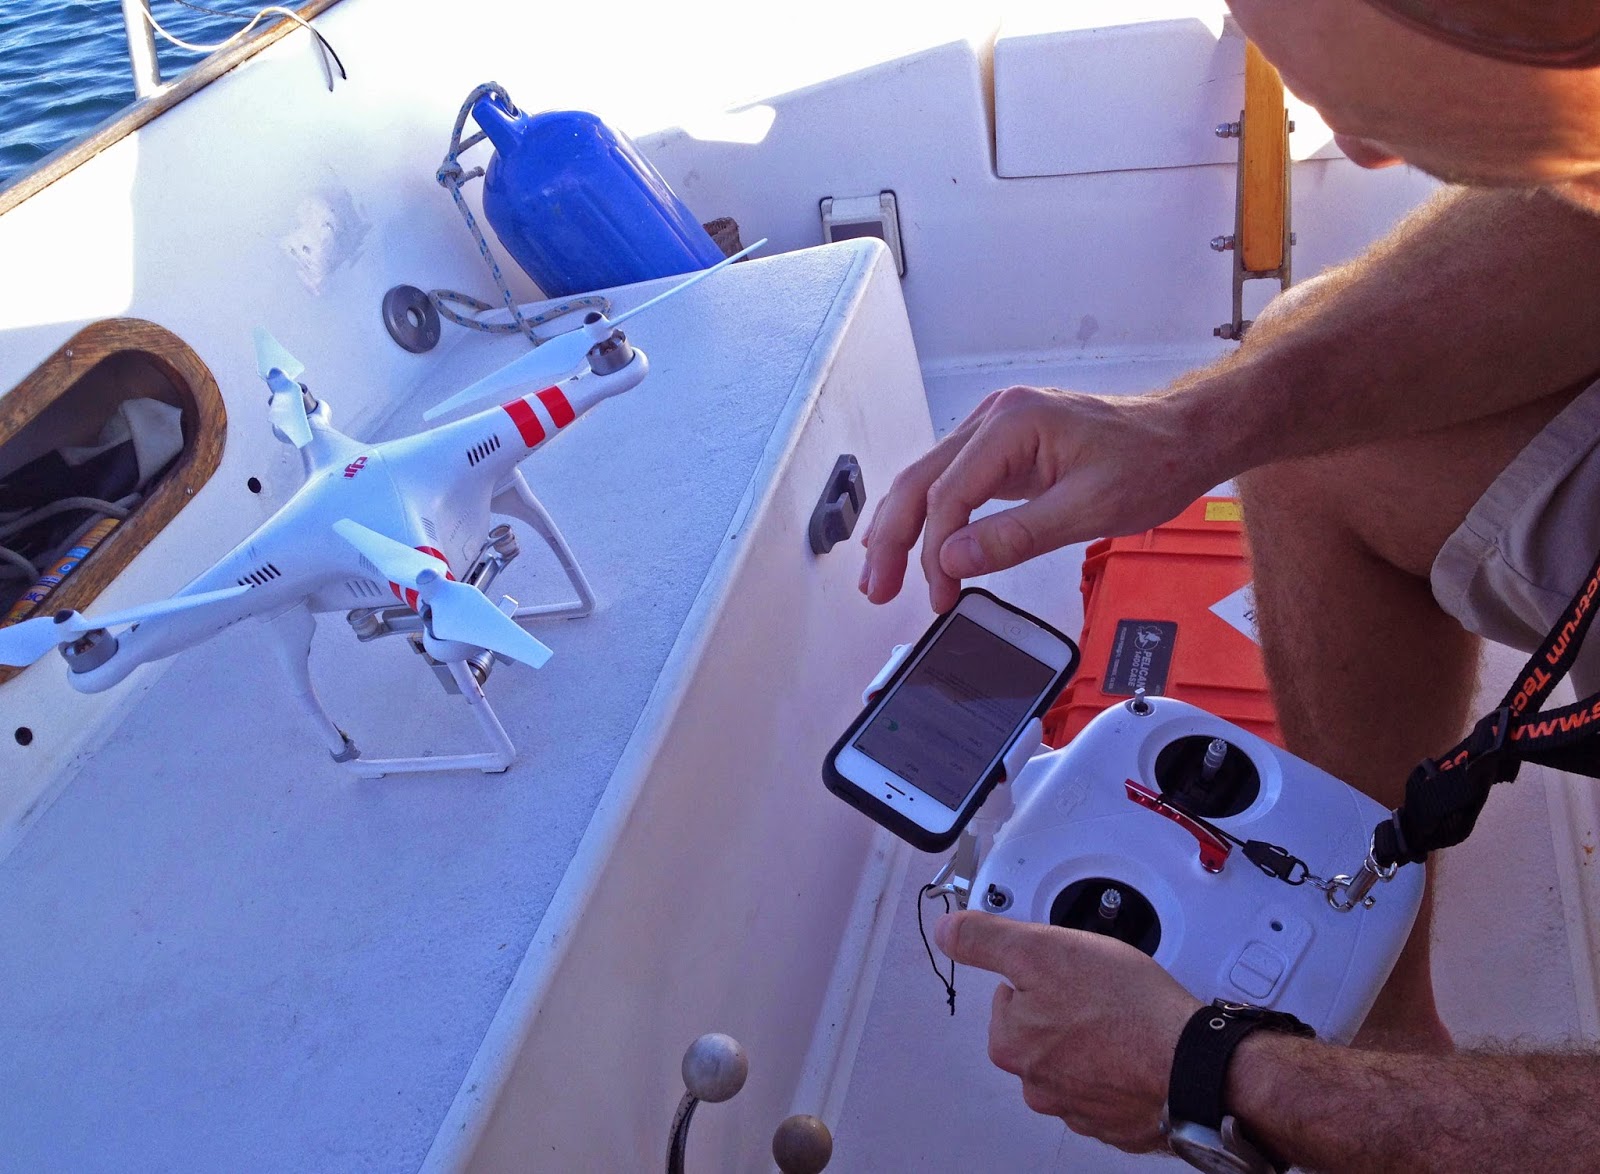 Advice for Piloting Your Drone While You're Out on the Water